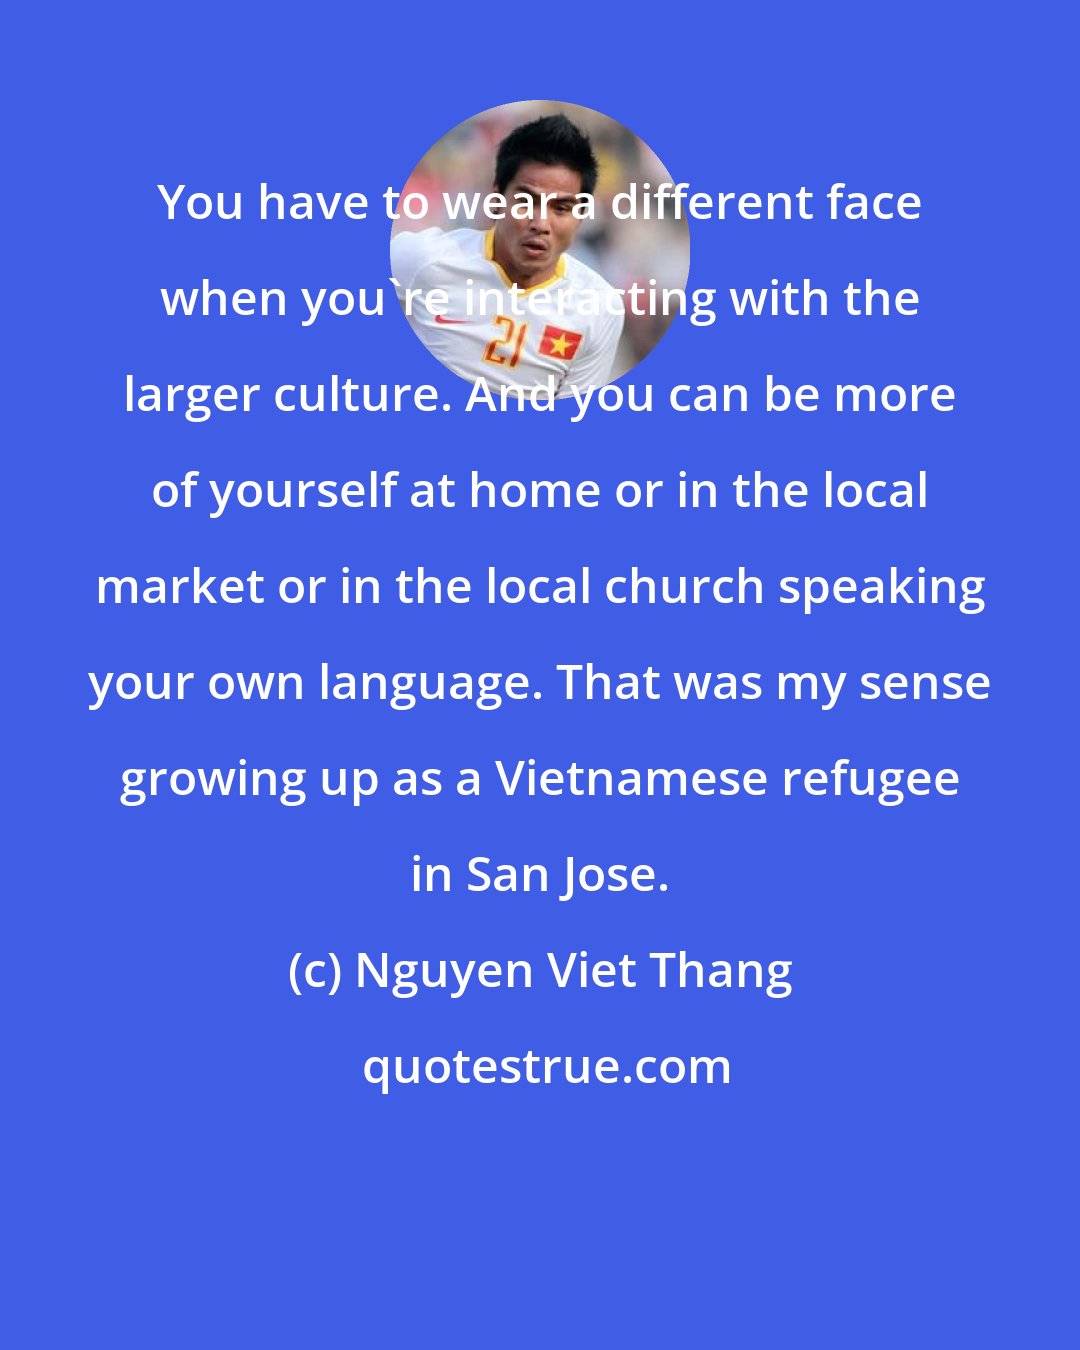 Nguyen Viet Thang: You have to wear a different face when you're interacting with the larger culture. And you can be more of yourself at home or in the local market or in the local church speaking your own language. That was my sense growing up as a Vietnamese refugee in San Jose.